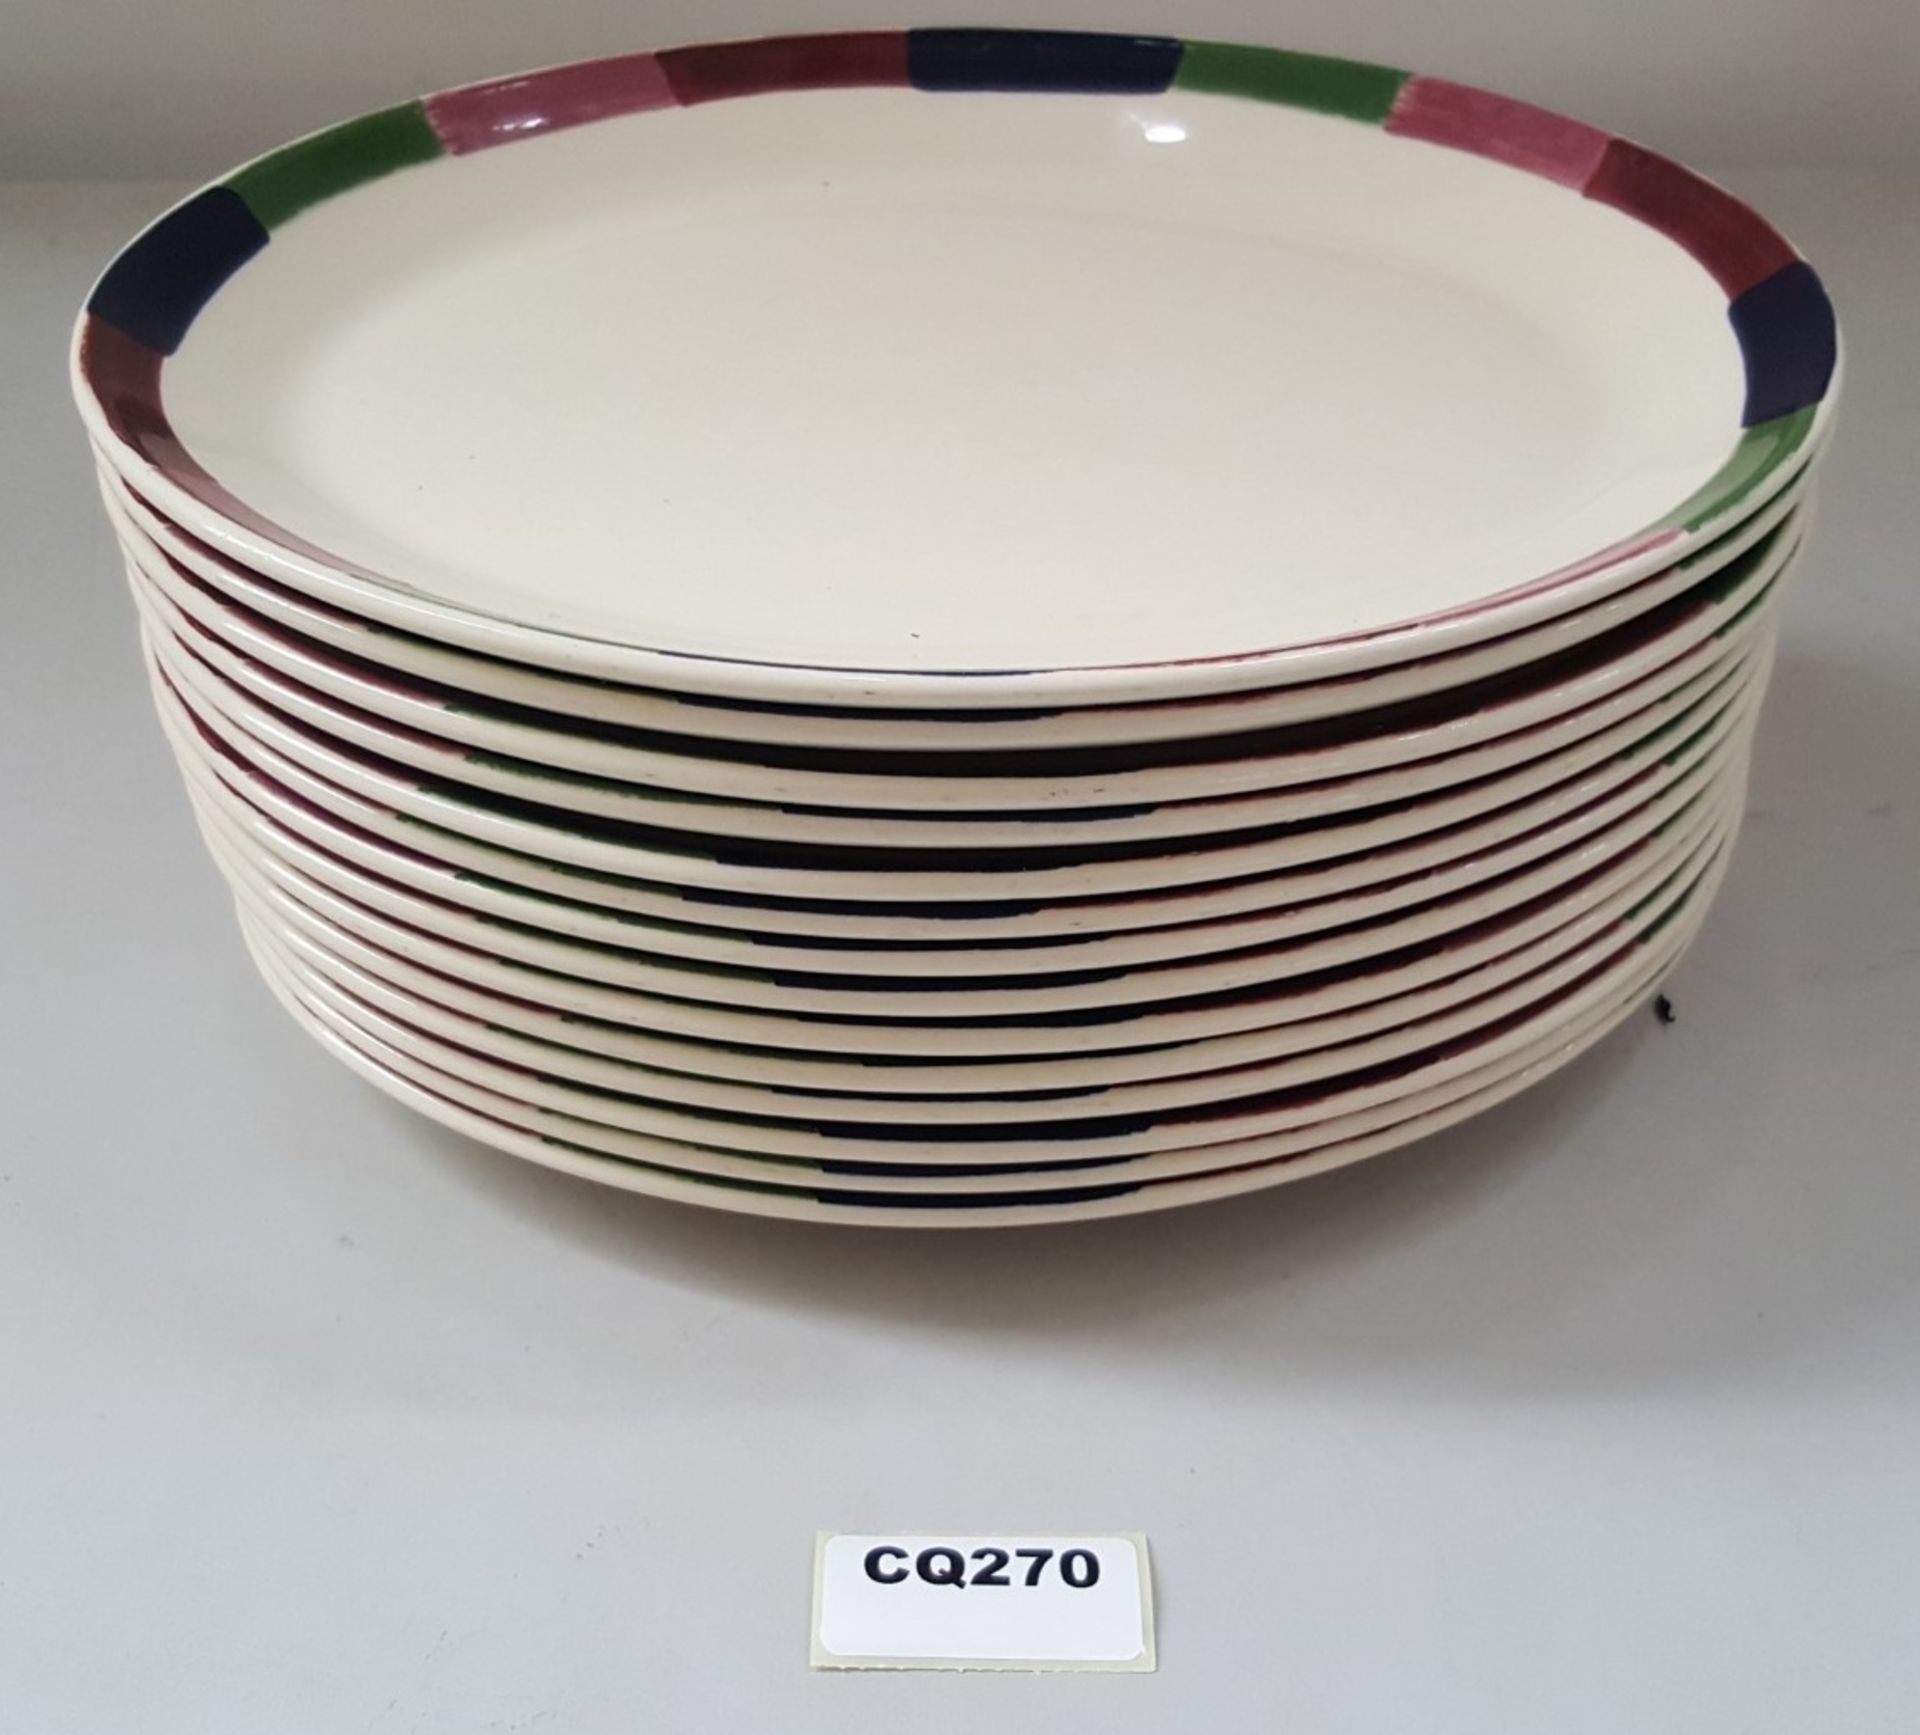 14 x Steelite Oval Serving Plates Cream With Pattered Egde L30/W23.5CM - Ref CQ270